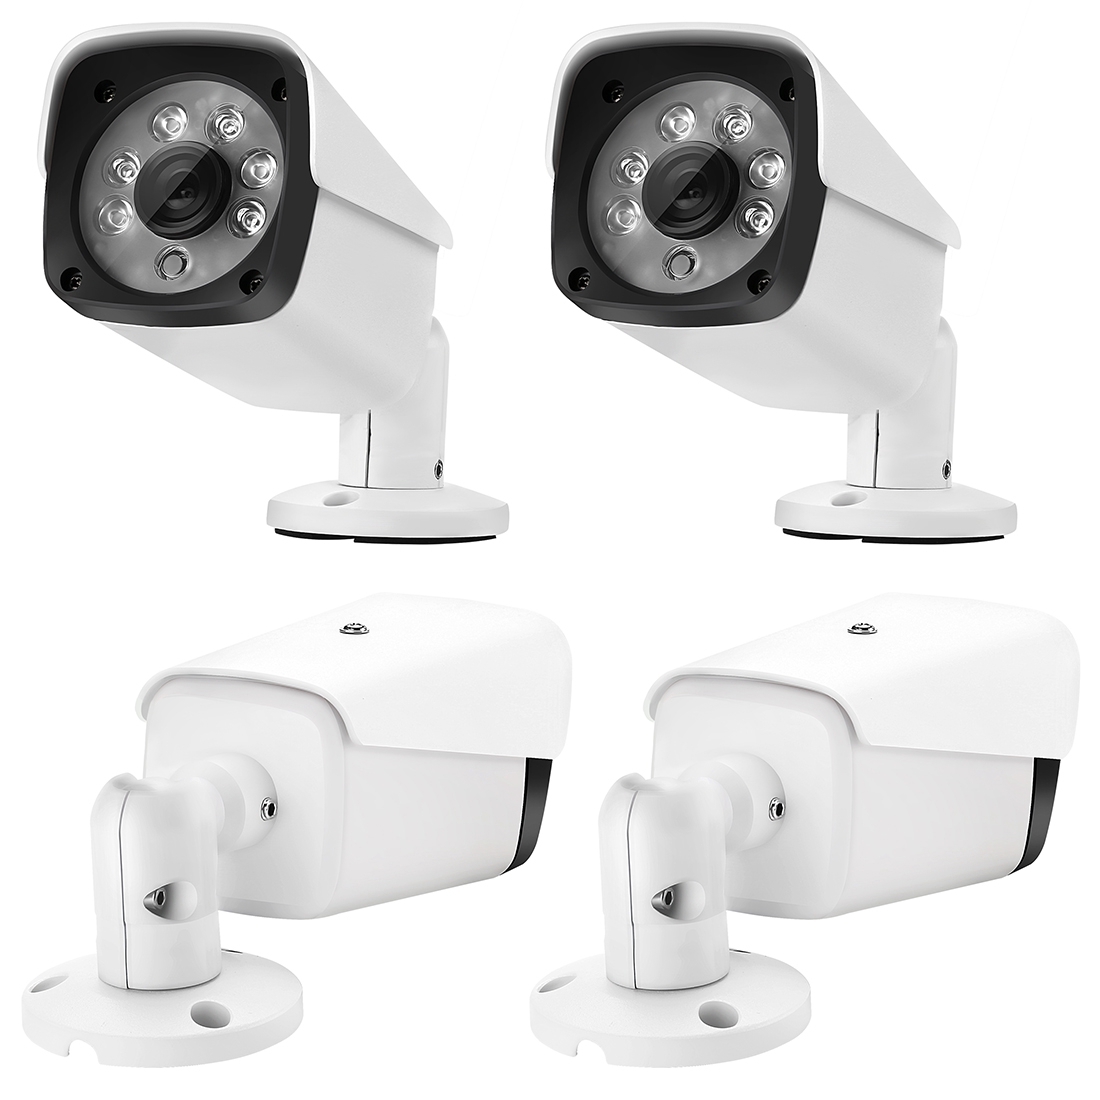 COTIER A4B3Kit 2MP 4CH 1080P CCTV Security Camera System AHD DVR Surveillance Kit, Support Night Vision / Motion Detection (White)